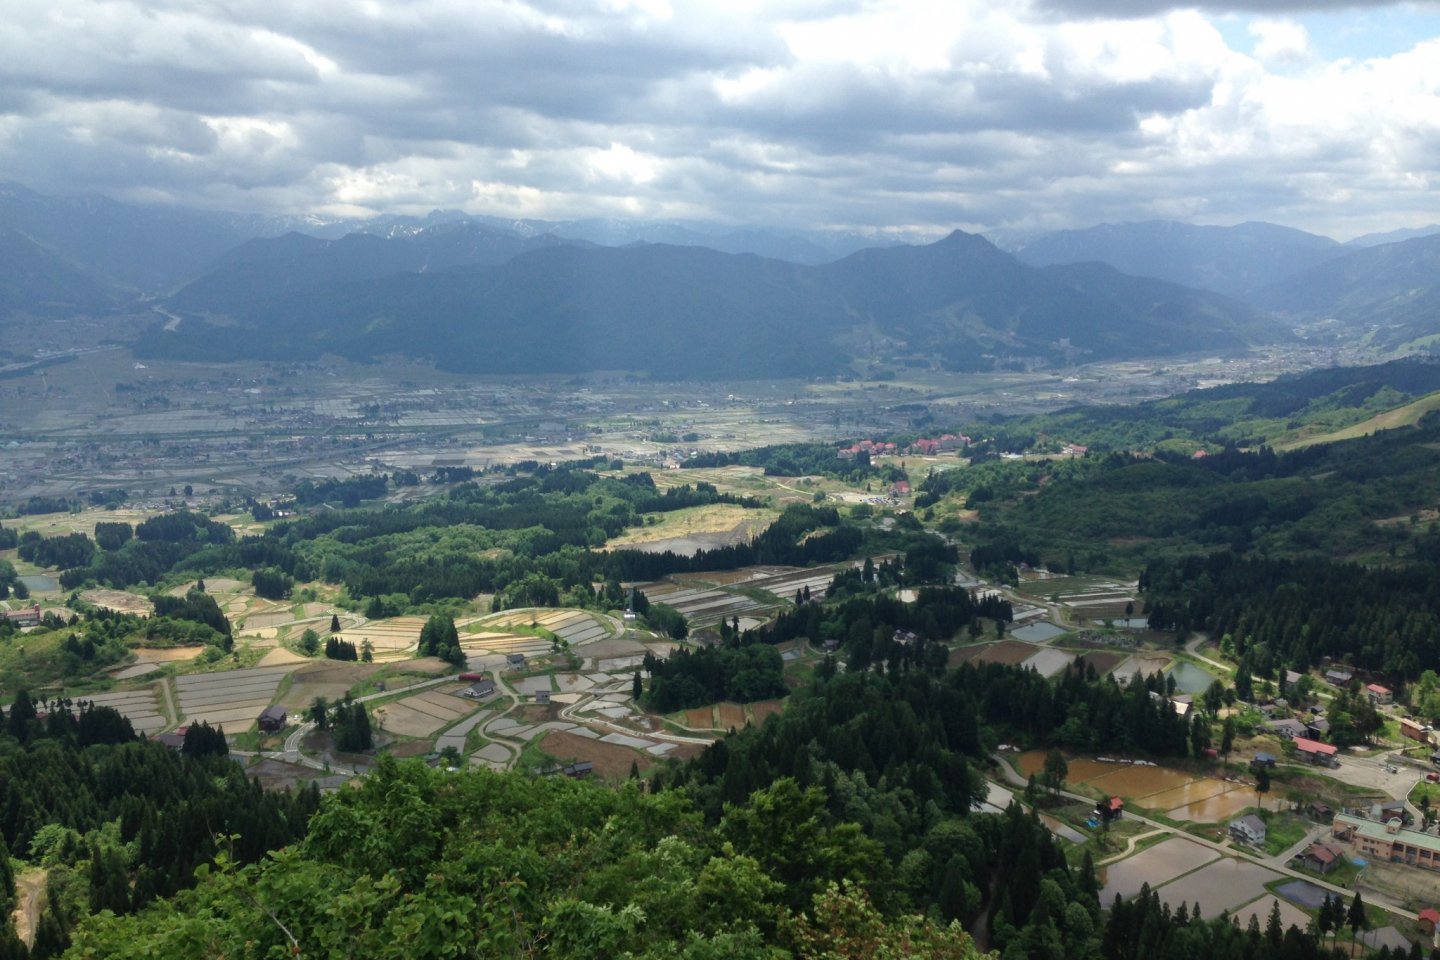 Taken from the highest point. From here, you can see the whole village; beyond is Minamiuonuma.